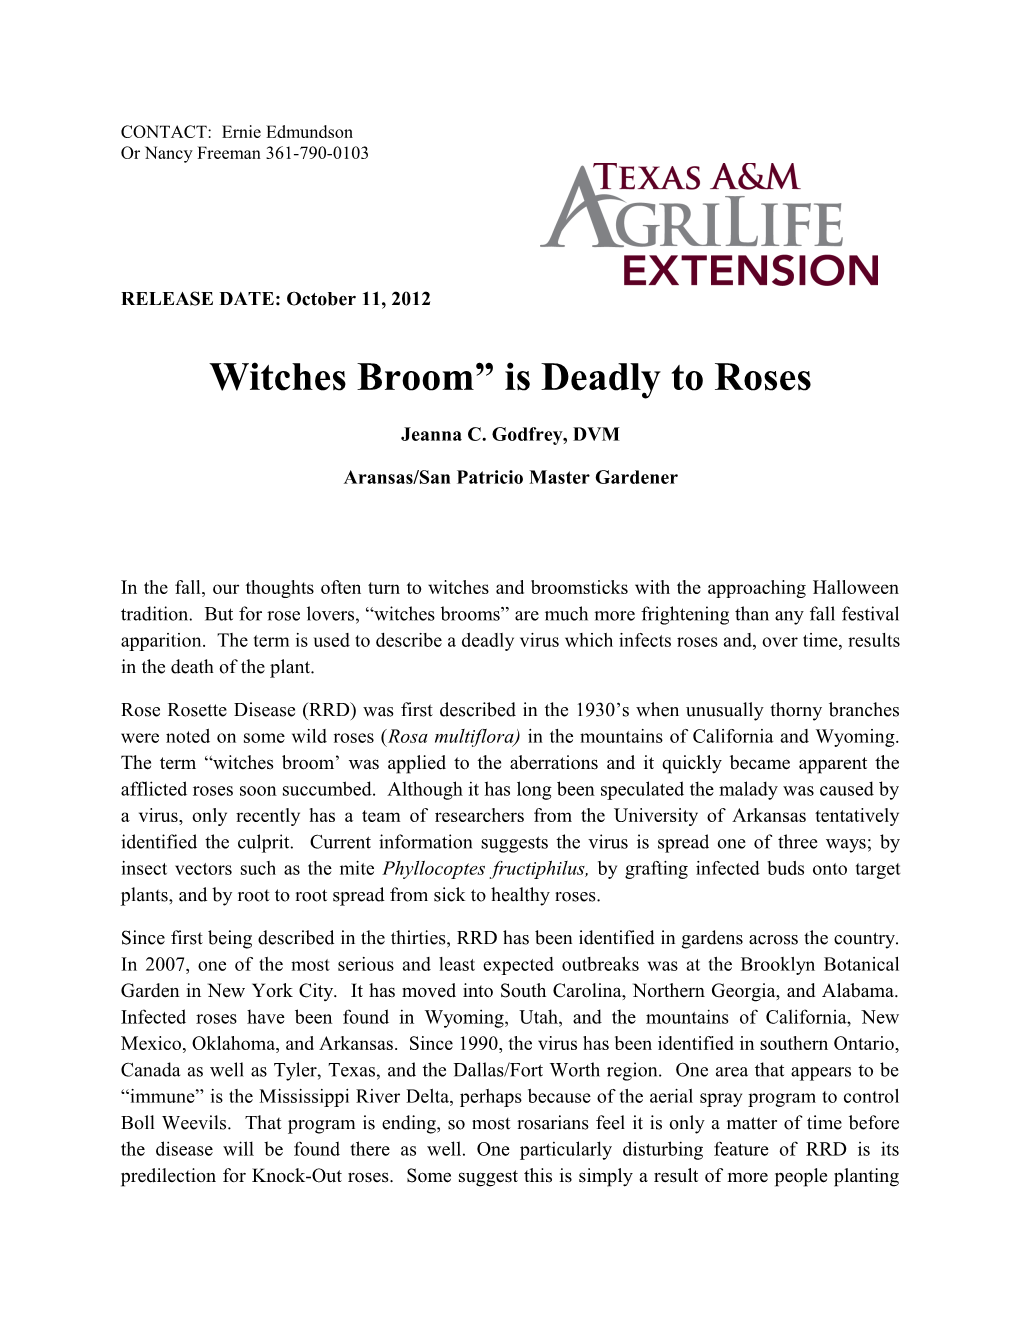 Witches Broom Is Deadly to Roses